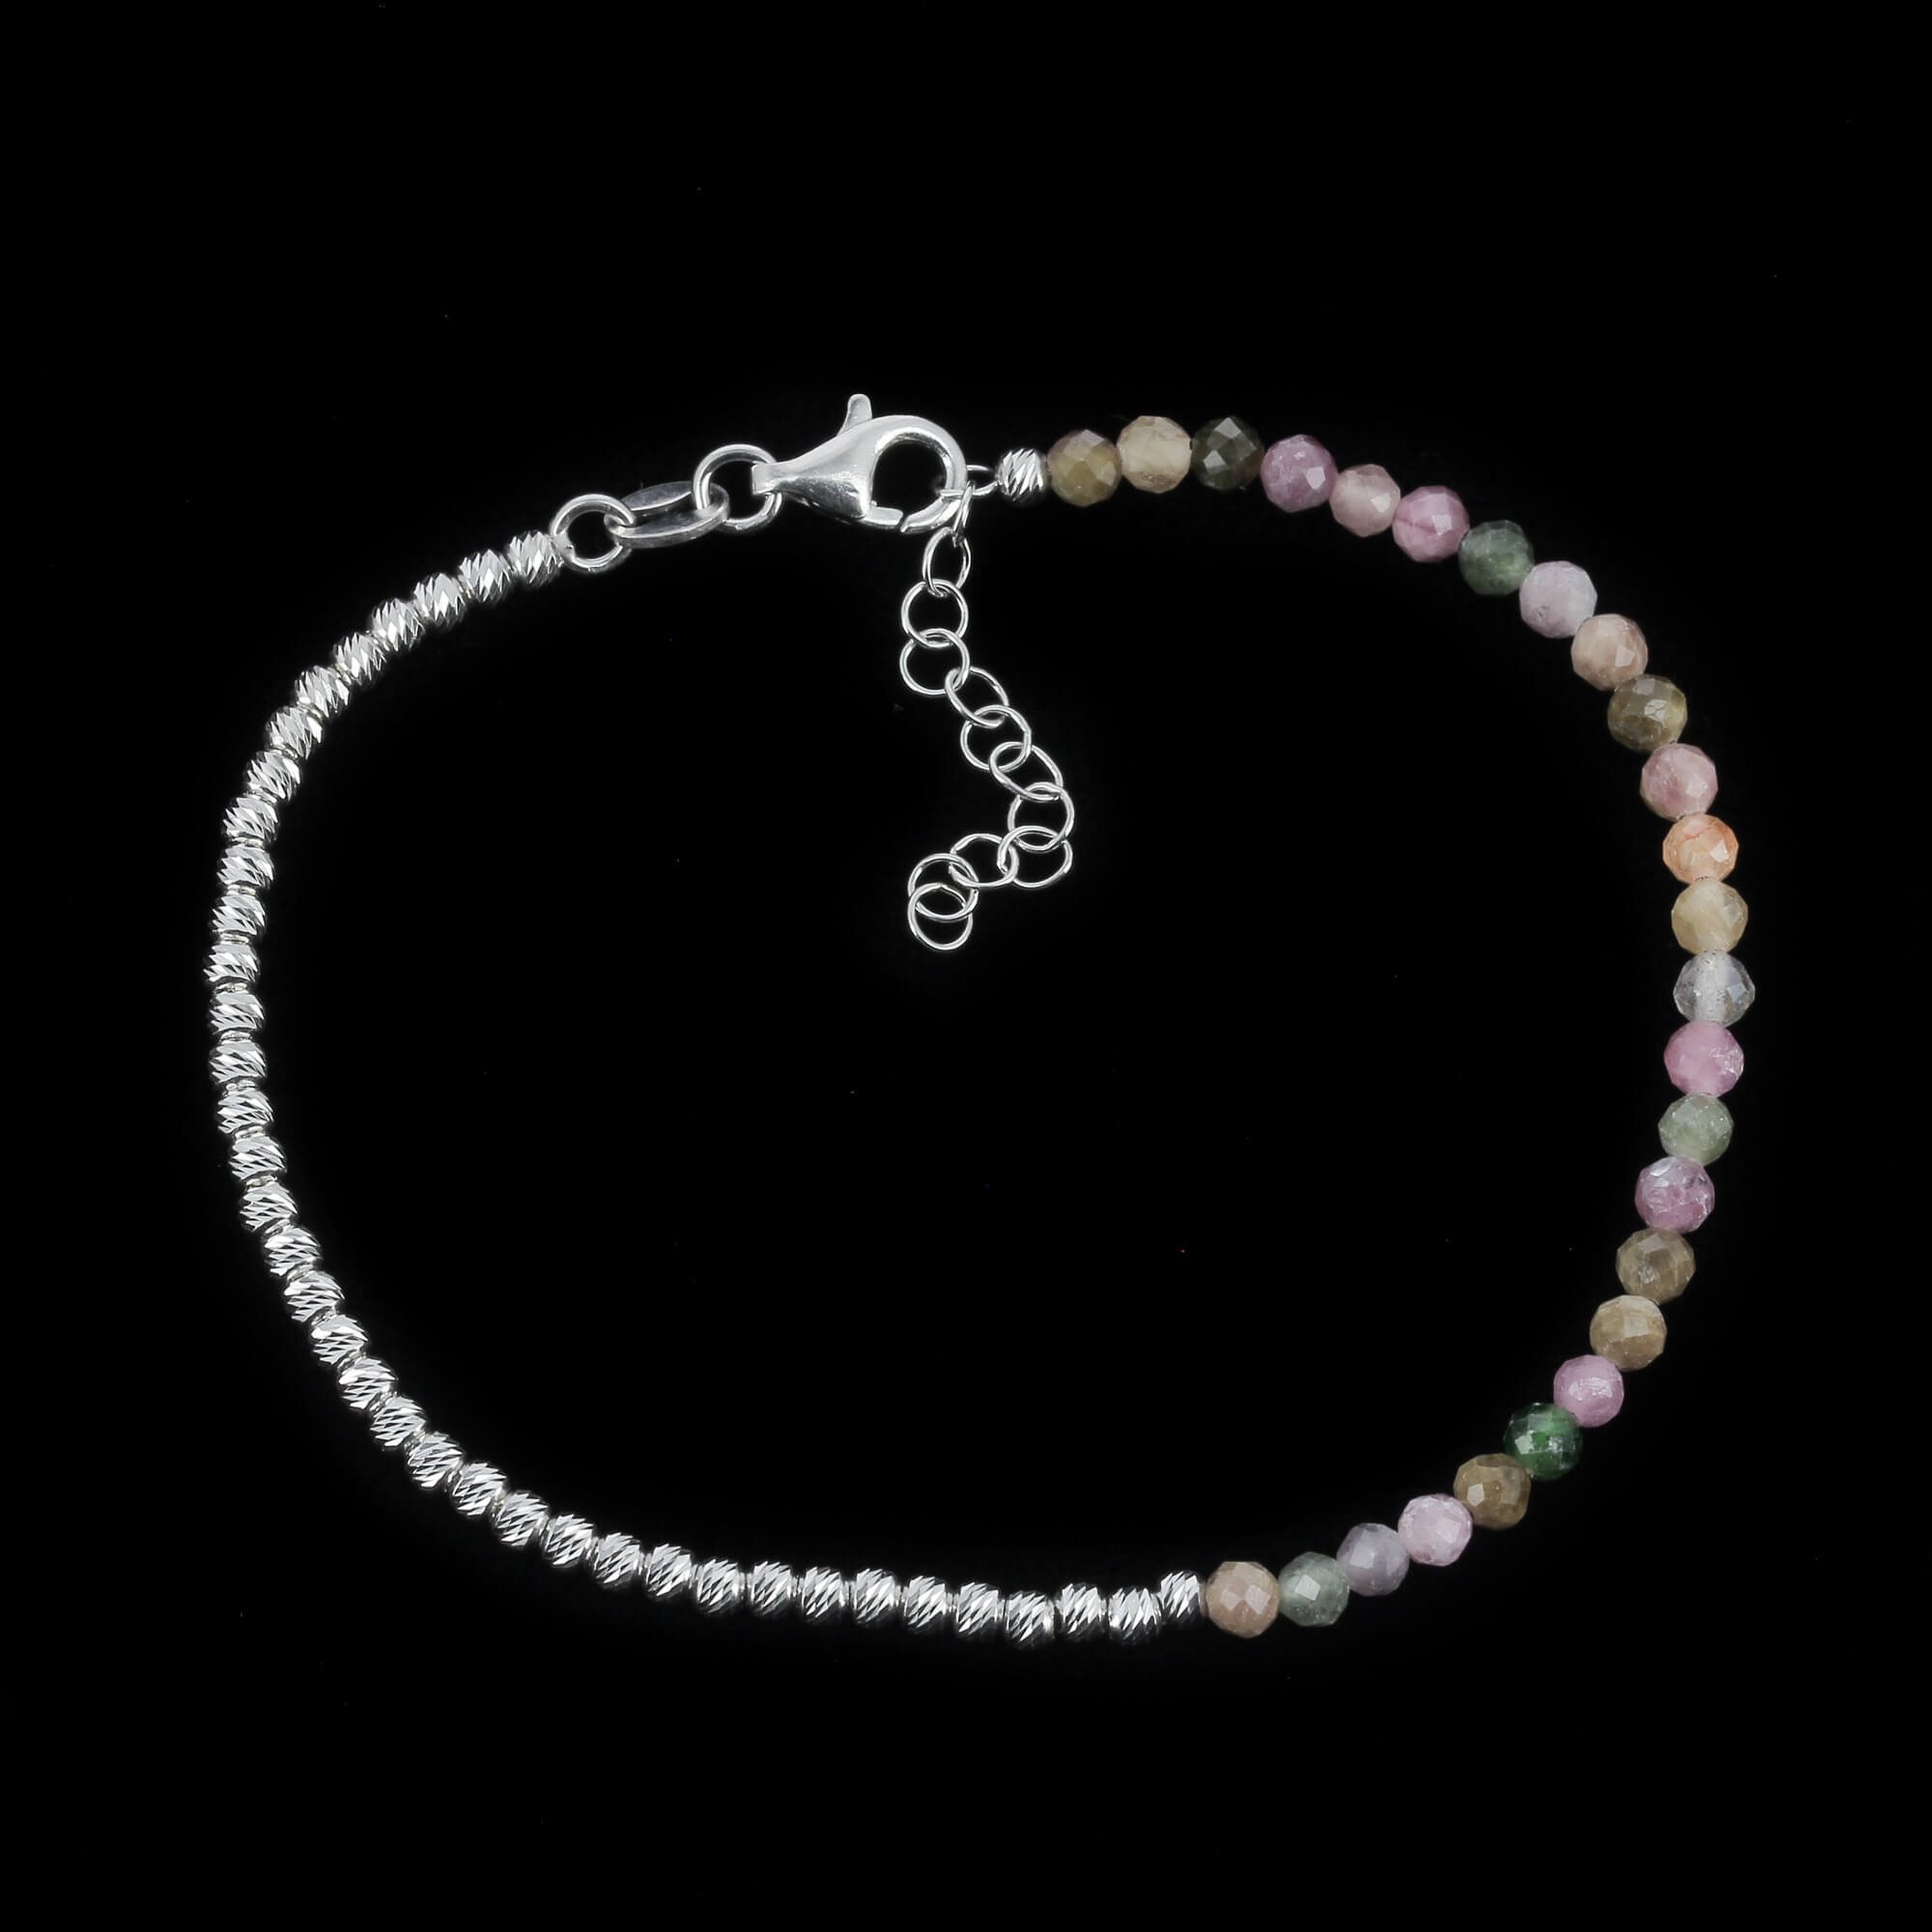 Silver bracelet 2.5 mm beads with color stones